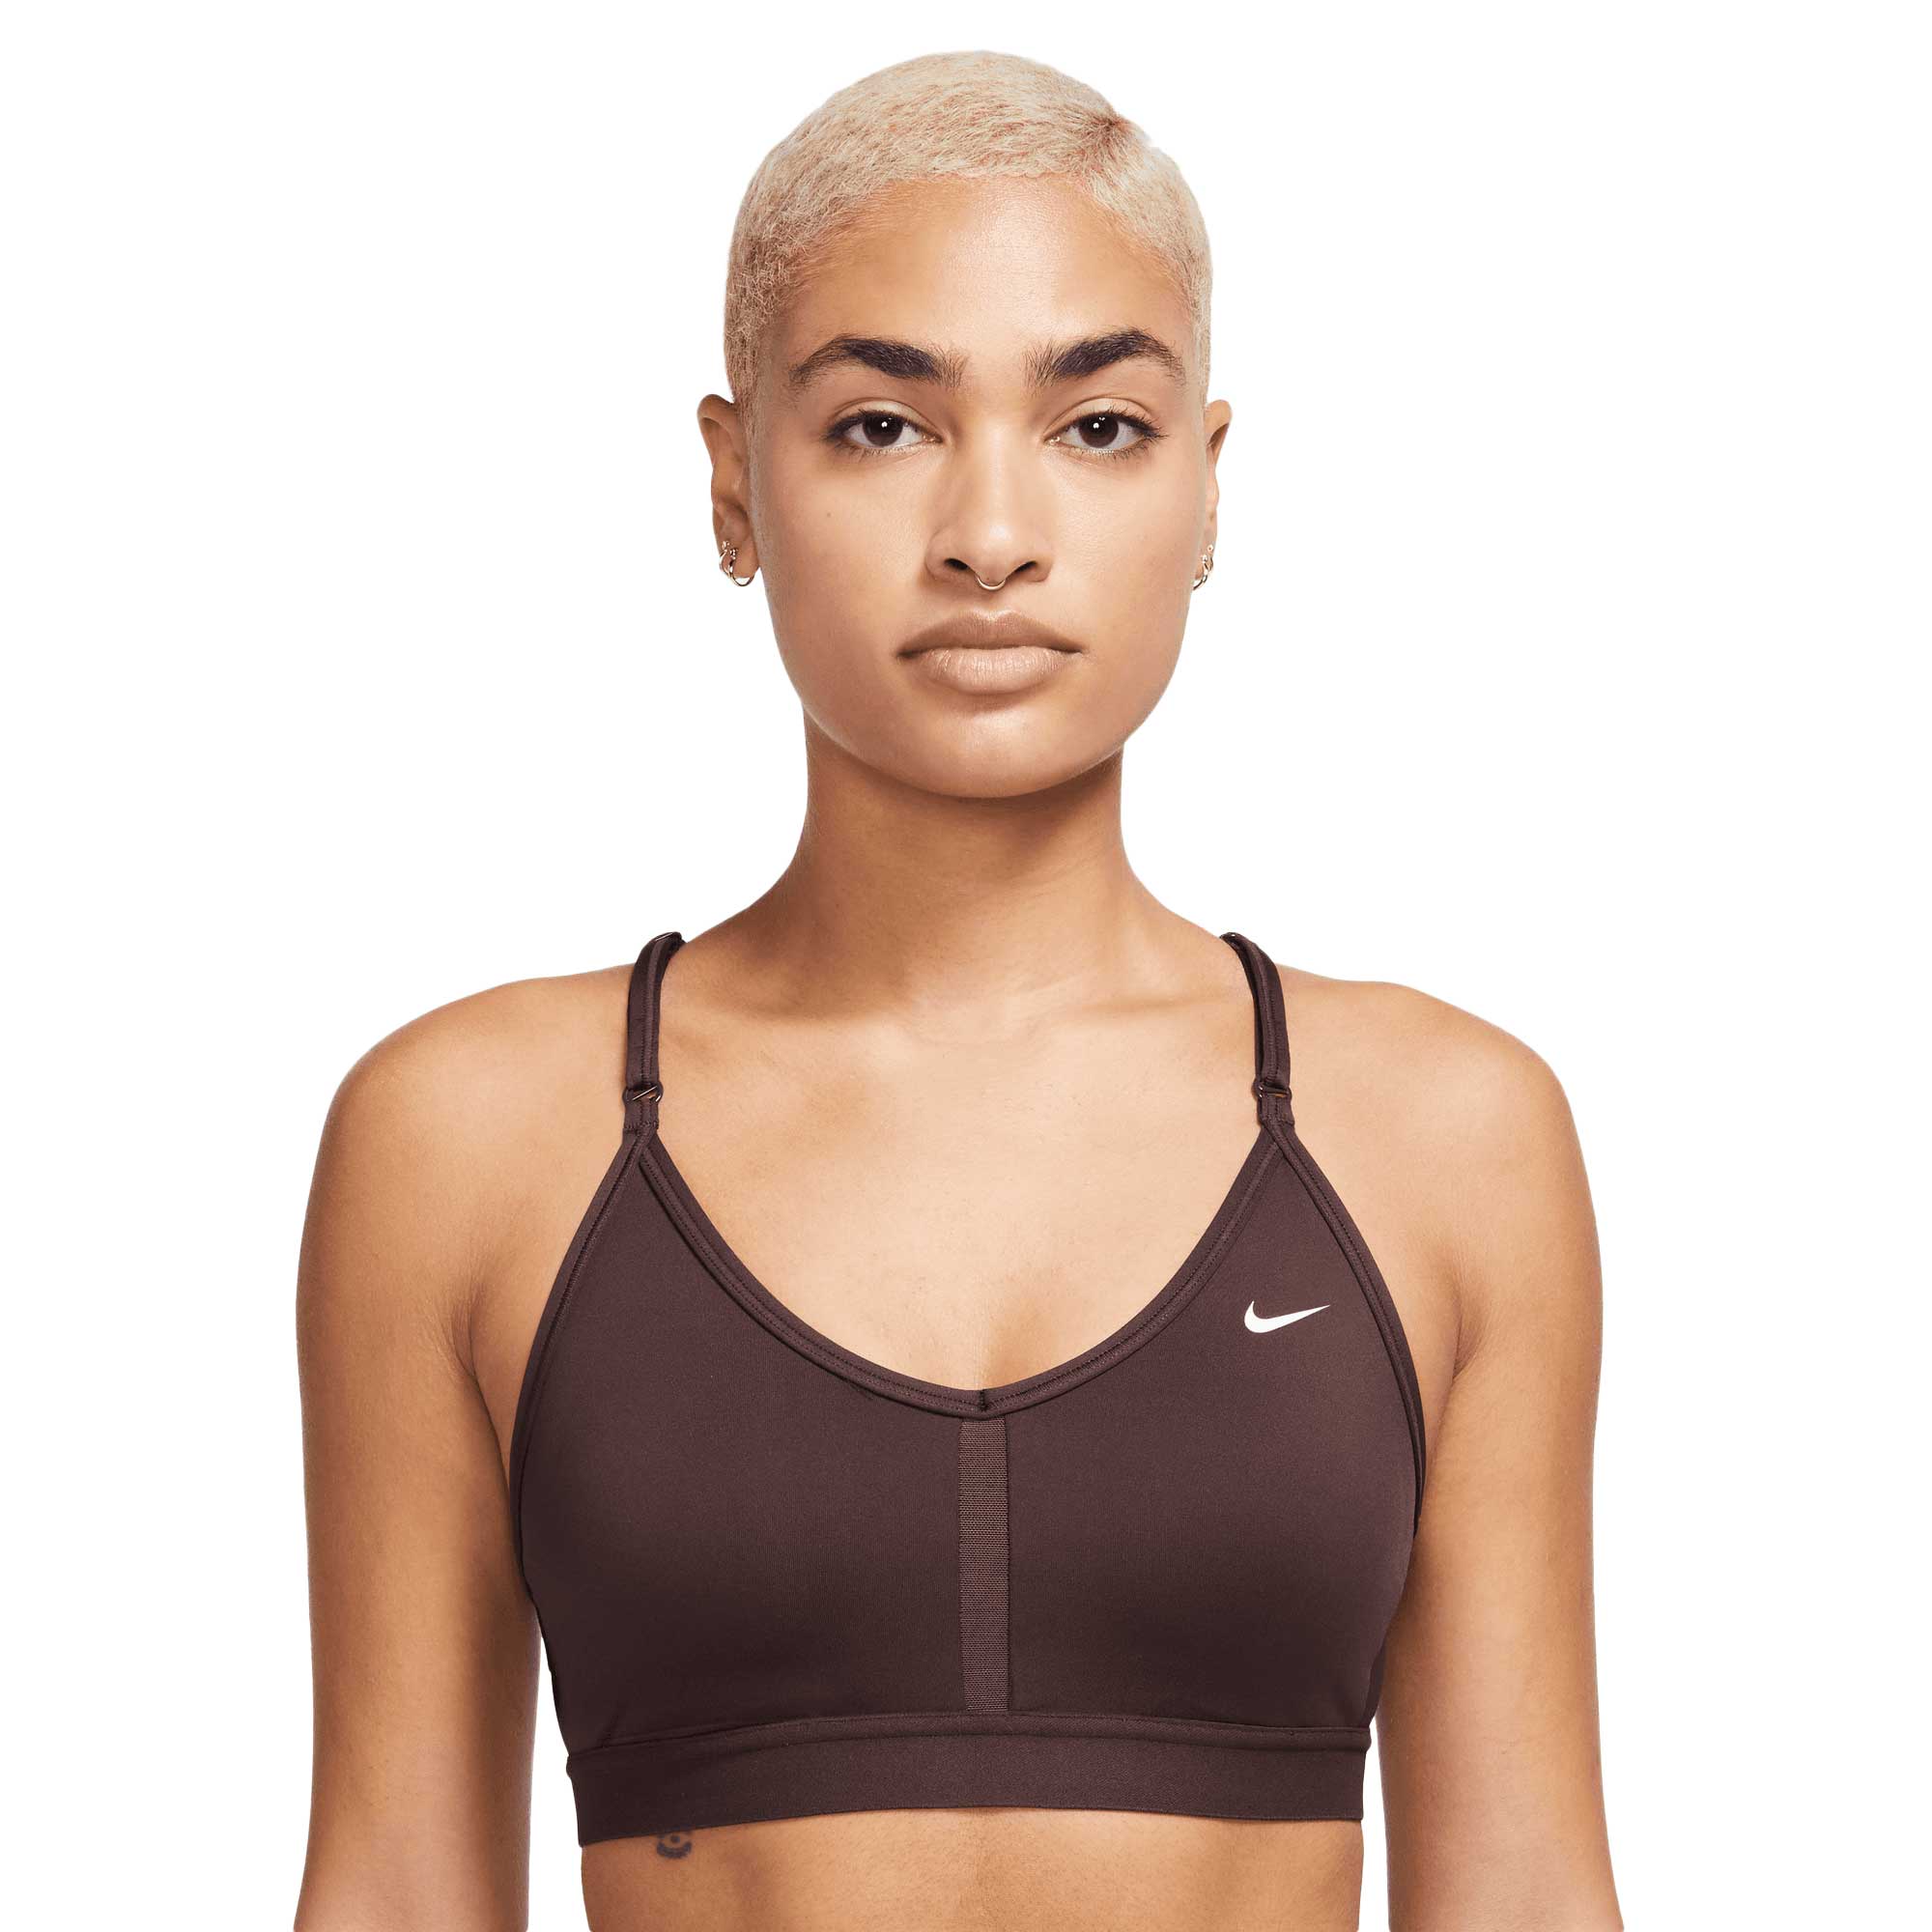 Shop Sports Bras At NYC's Best Sports Store - Paragon Sports